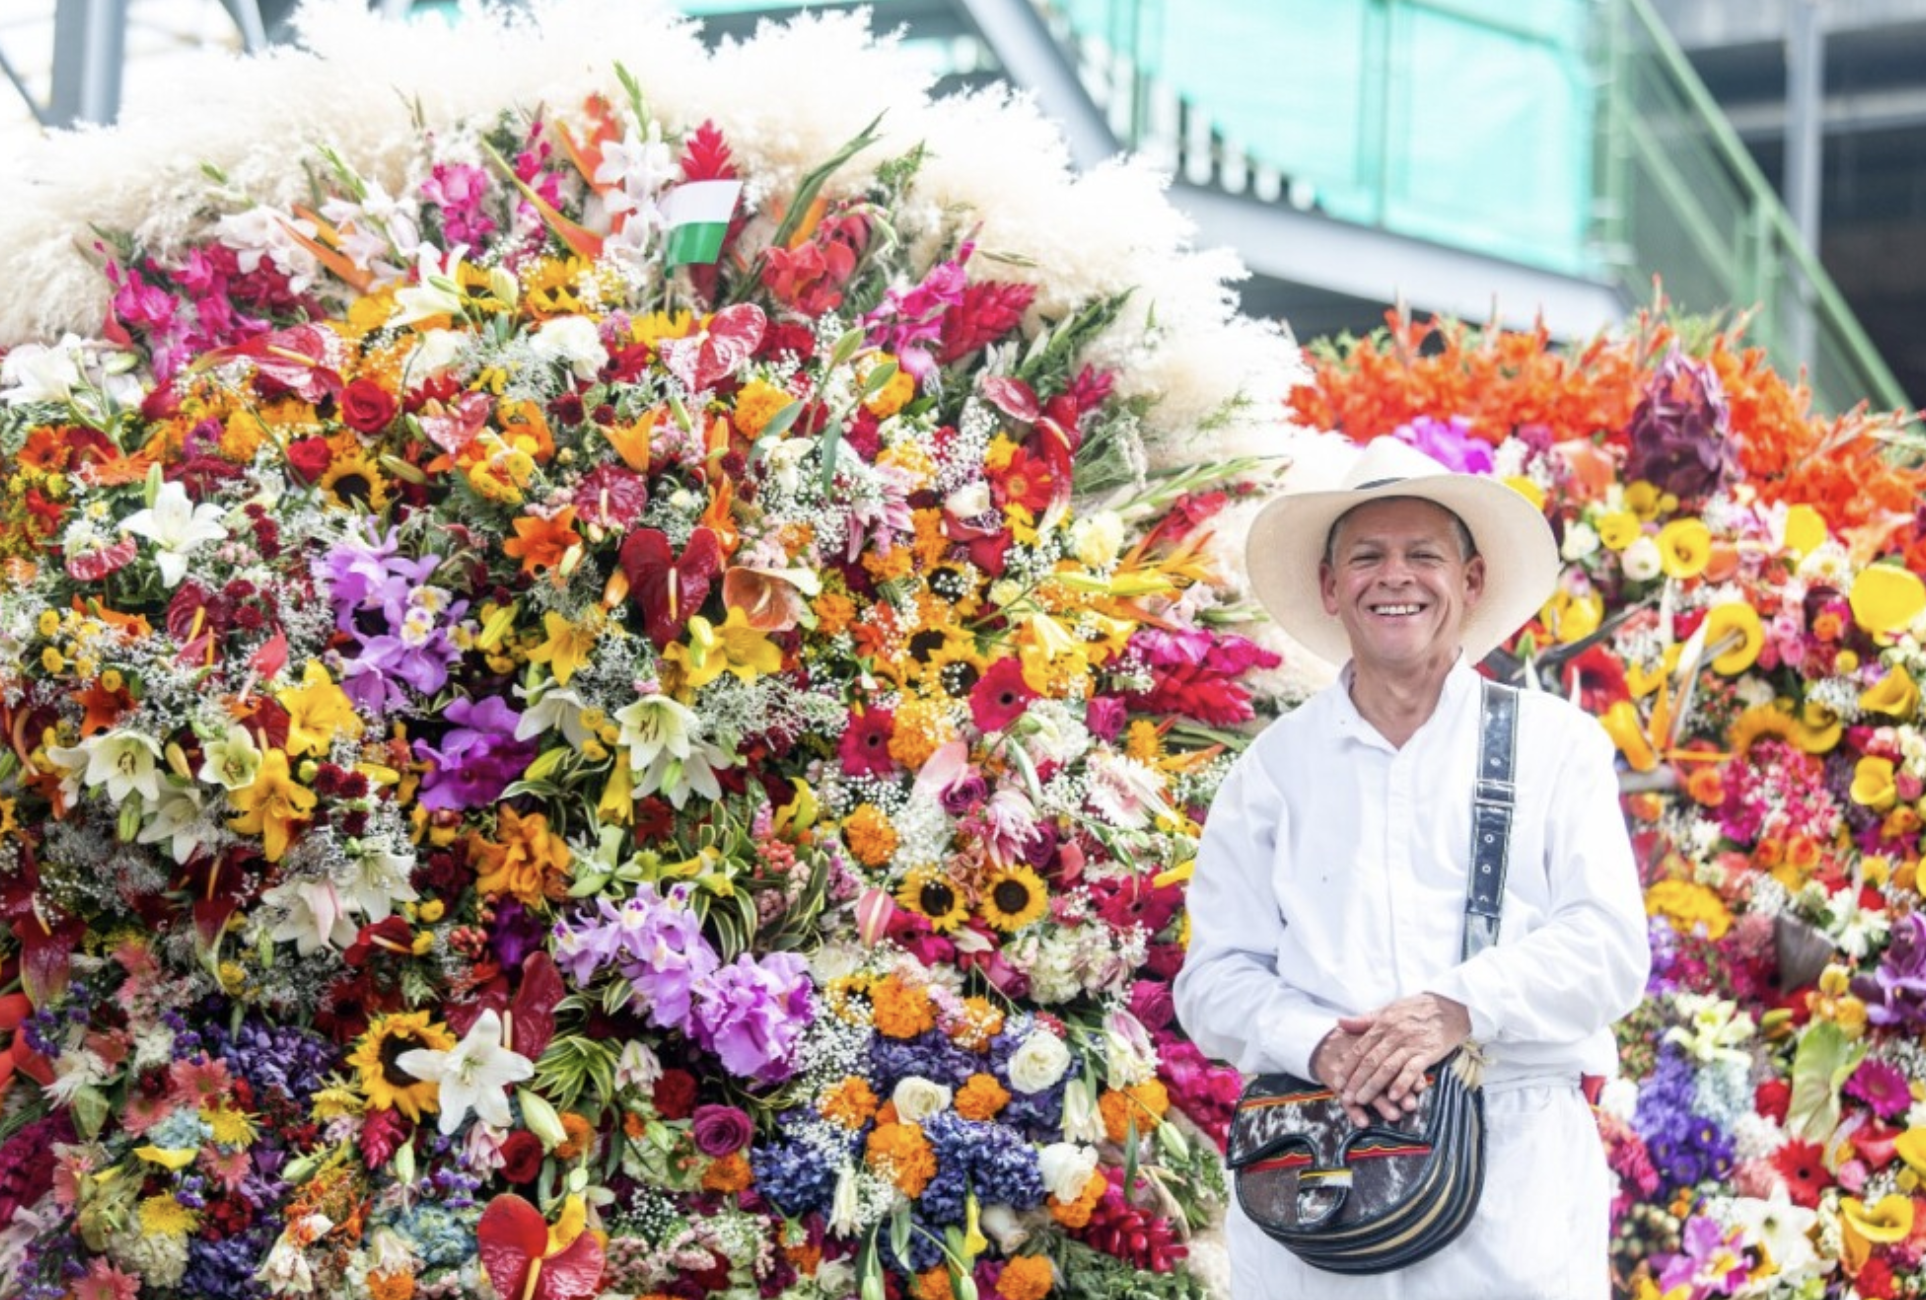 Everything You Need to Know About the 2022 Flower Festival